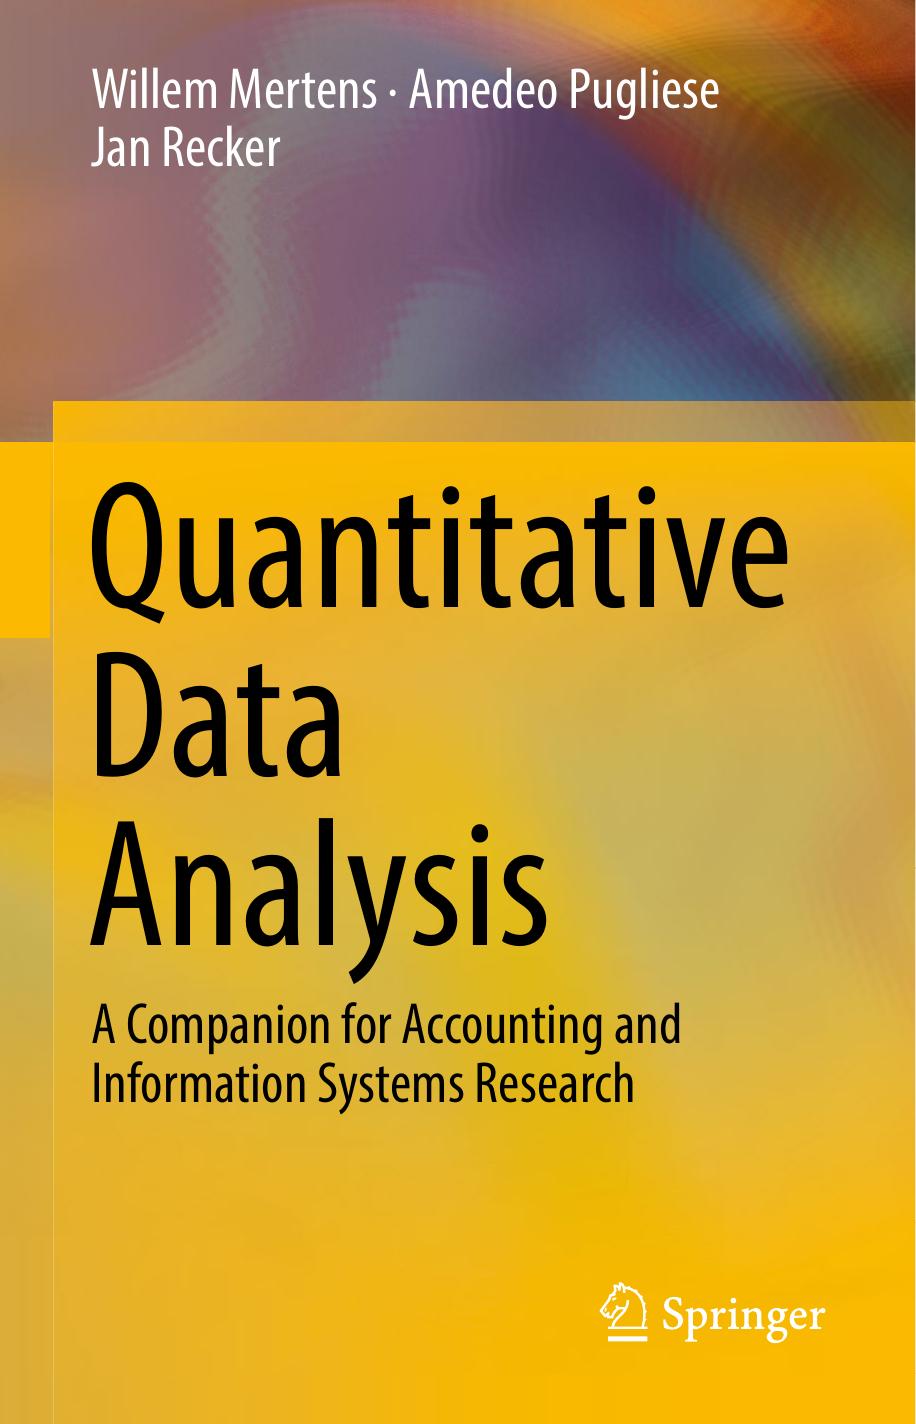 Quantitative Data Analysis A Companion for Accounting and Information Systems Research by Willem Mertens, Amedeo Pugliese, Jan Recker (auth.) (z-lib.org)